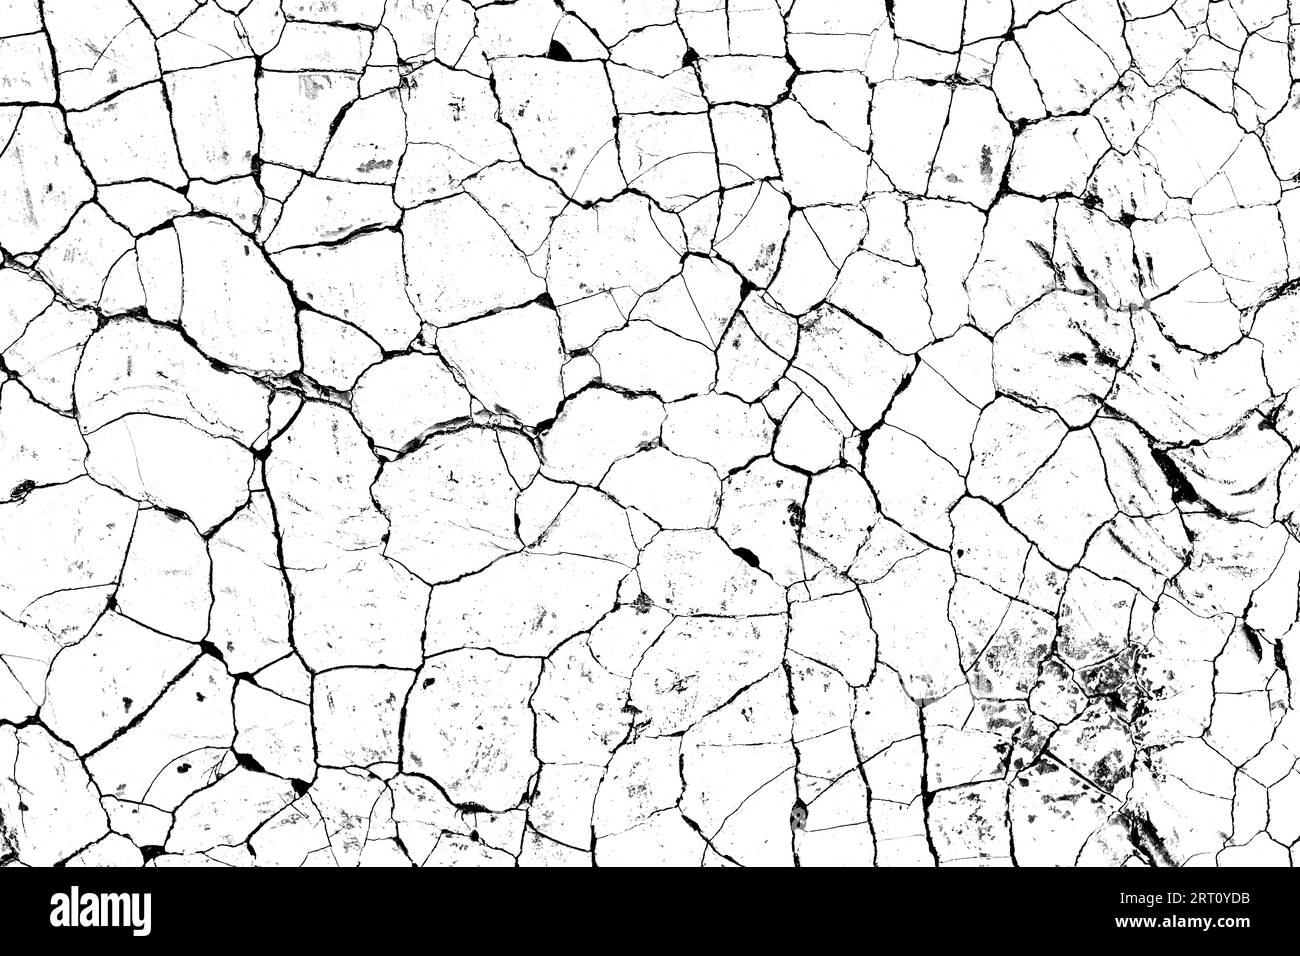 Cracked scaly surface - grunge texture Stock Photo